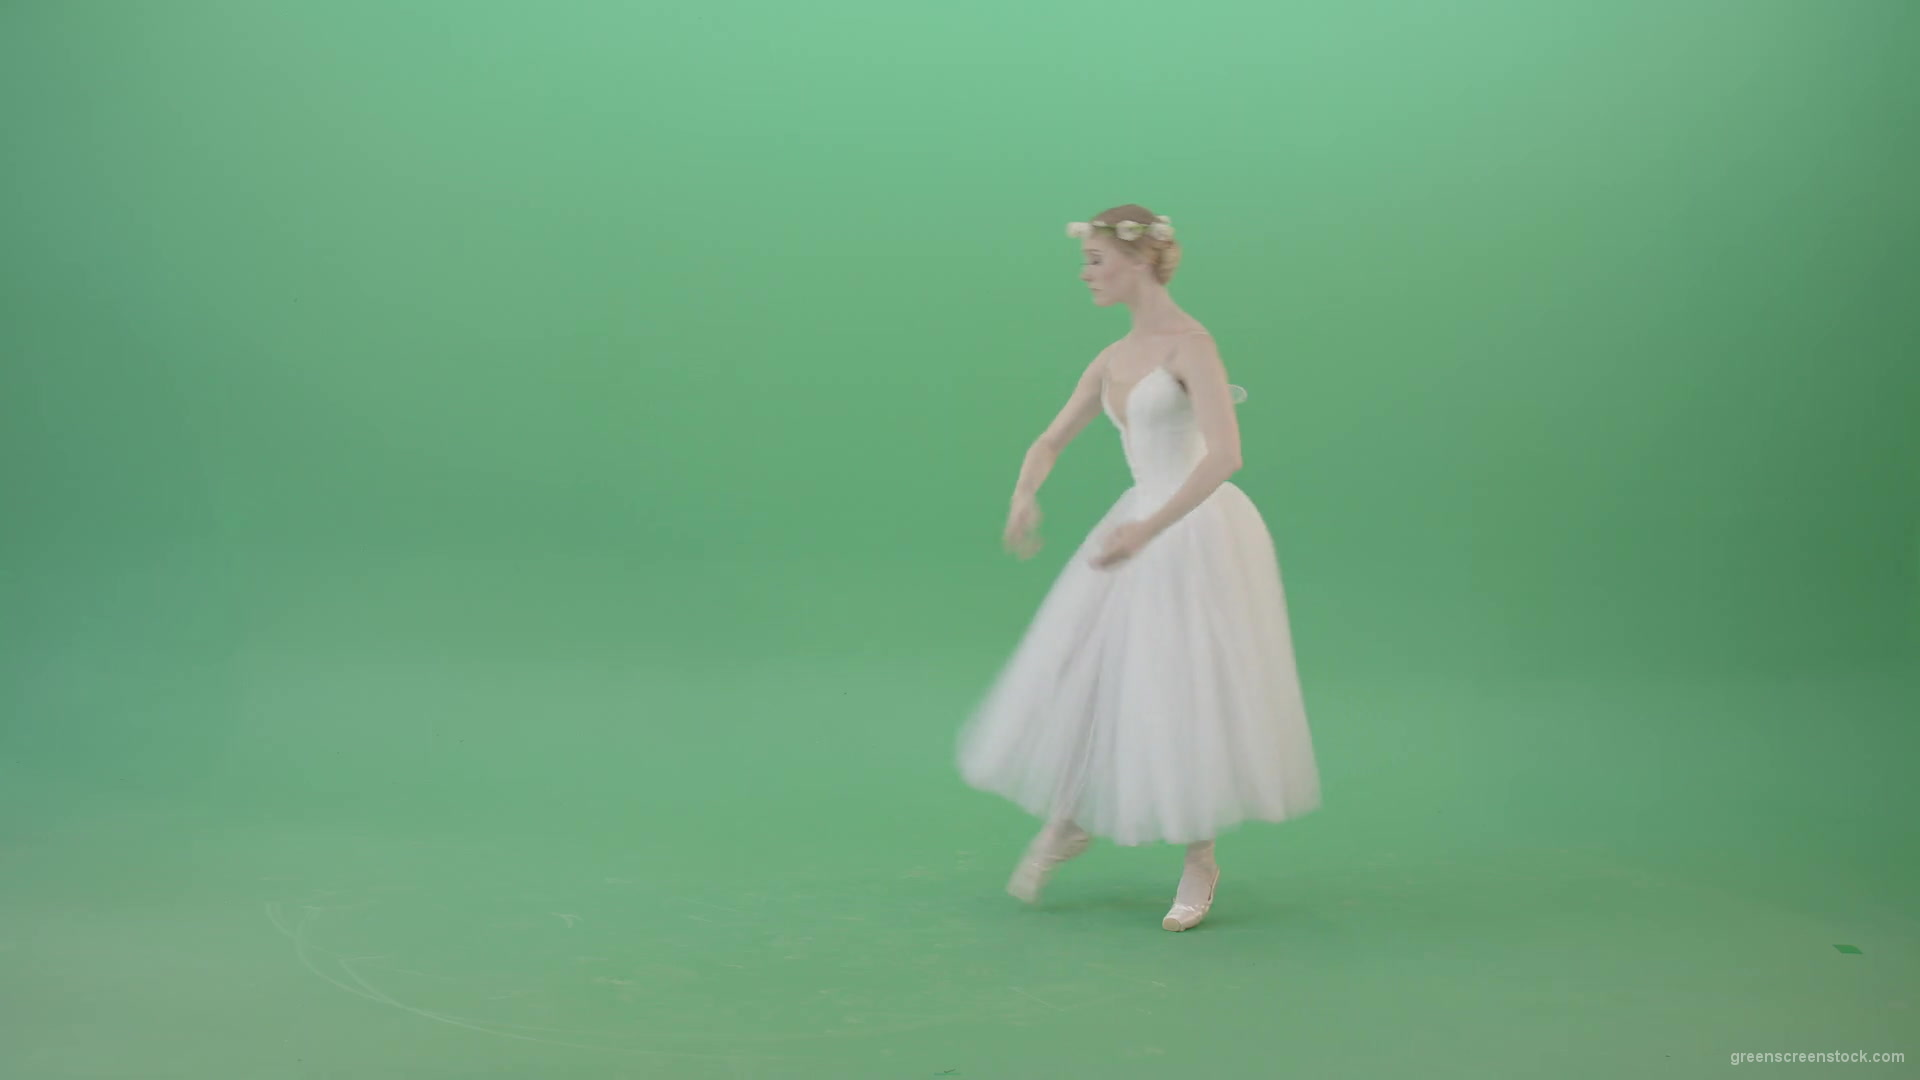 Blonde-Girl-in-elegant-white-wedding-dress-mowing-away-and-dancing-ballet-art-isolated-on-green-screen-4K-Video-Footage-1920_005 Green Screen Stock